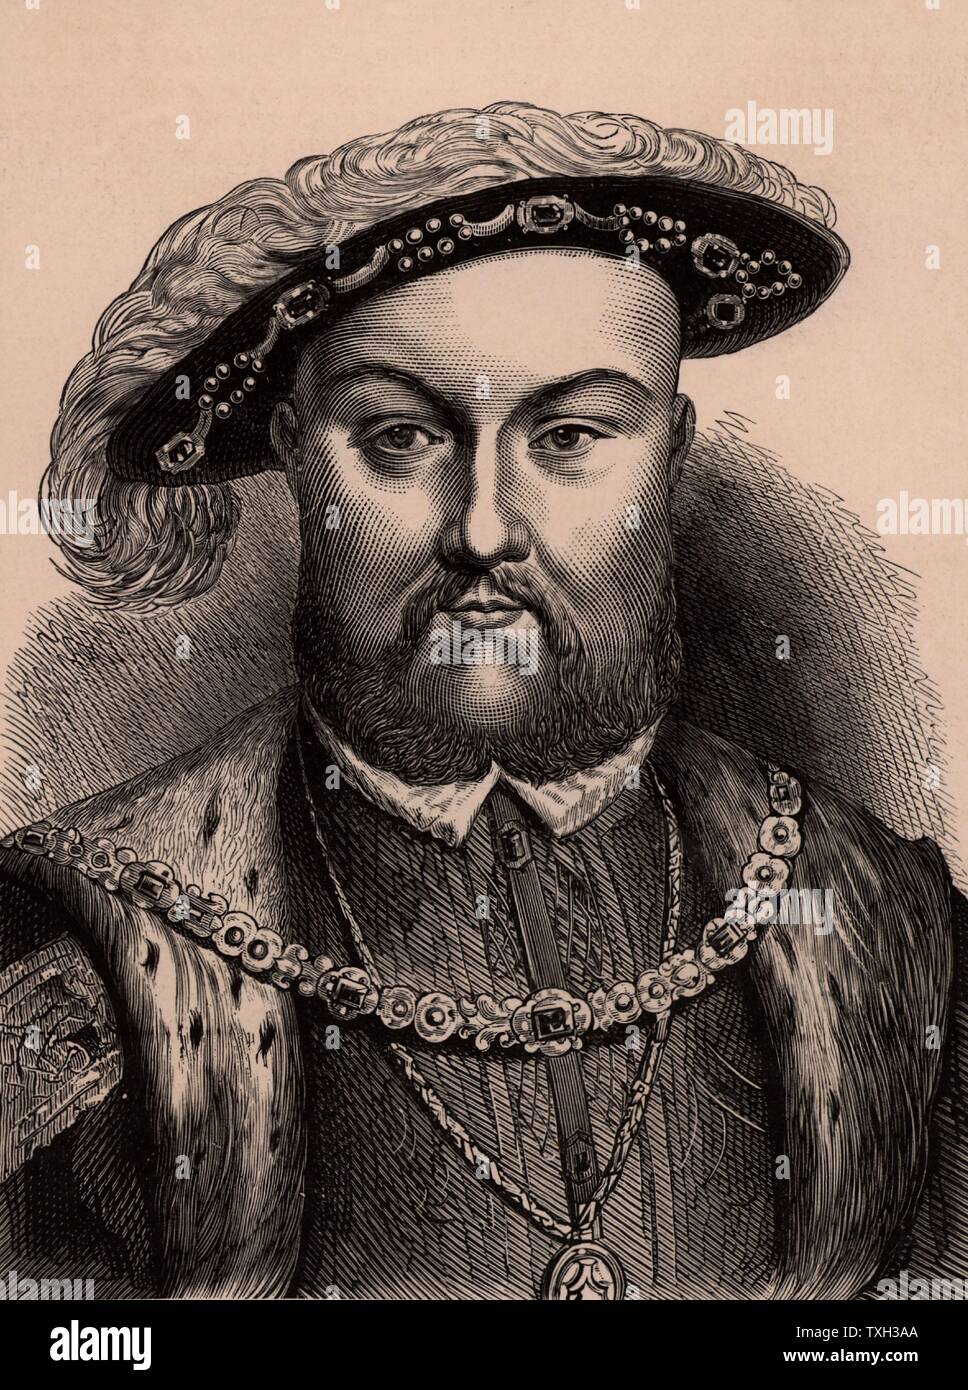 Henry VIII (1491-1547) king of England from 1509. Second monarch of the Tudor dynasty, father of Edward VI, Mary I, and Elizabeth I. Wood engraving c1900. Stock Photo